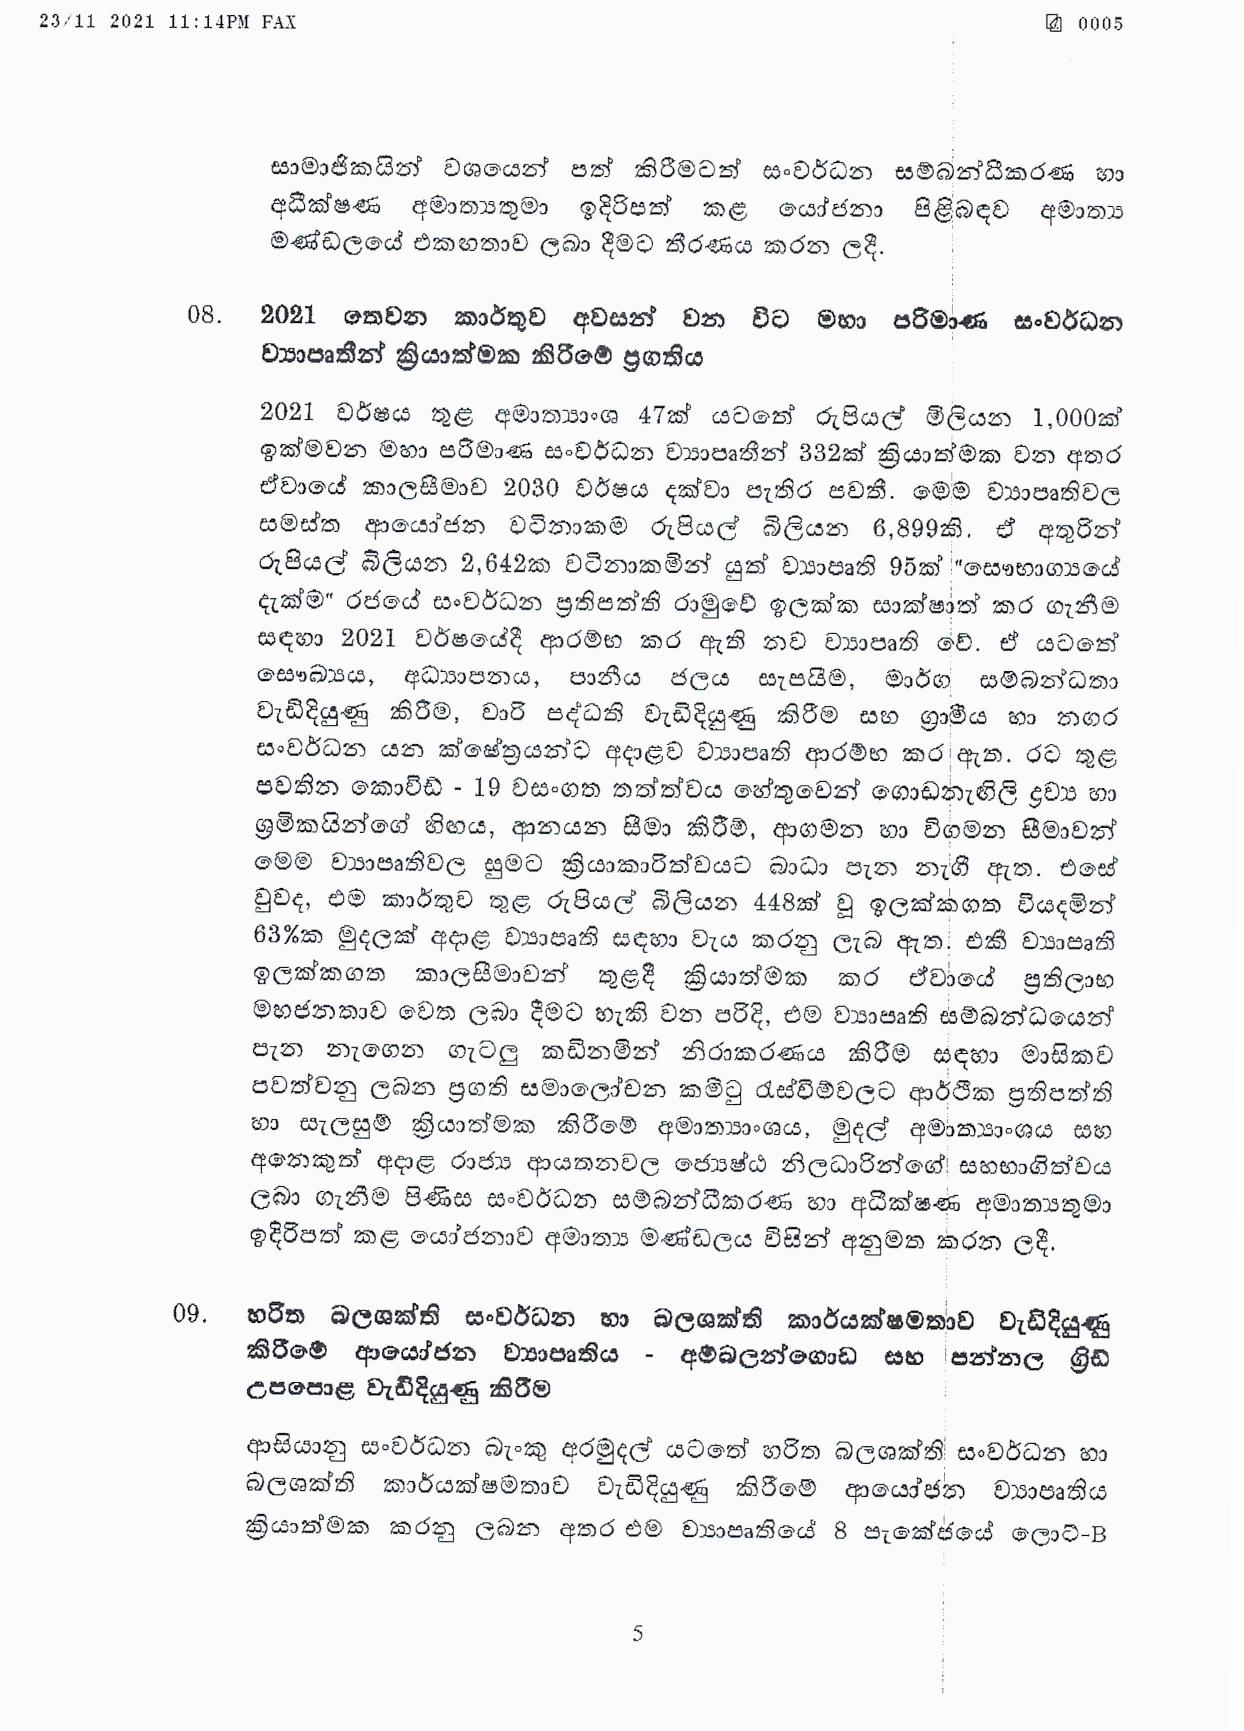 Cabinet Decision on 23.11.2021 page 005